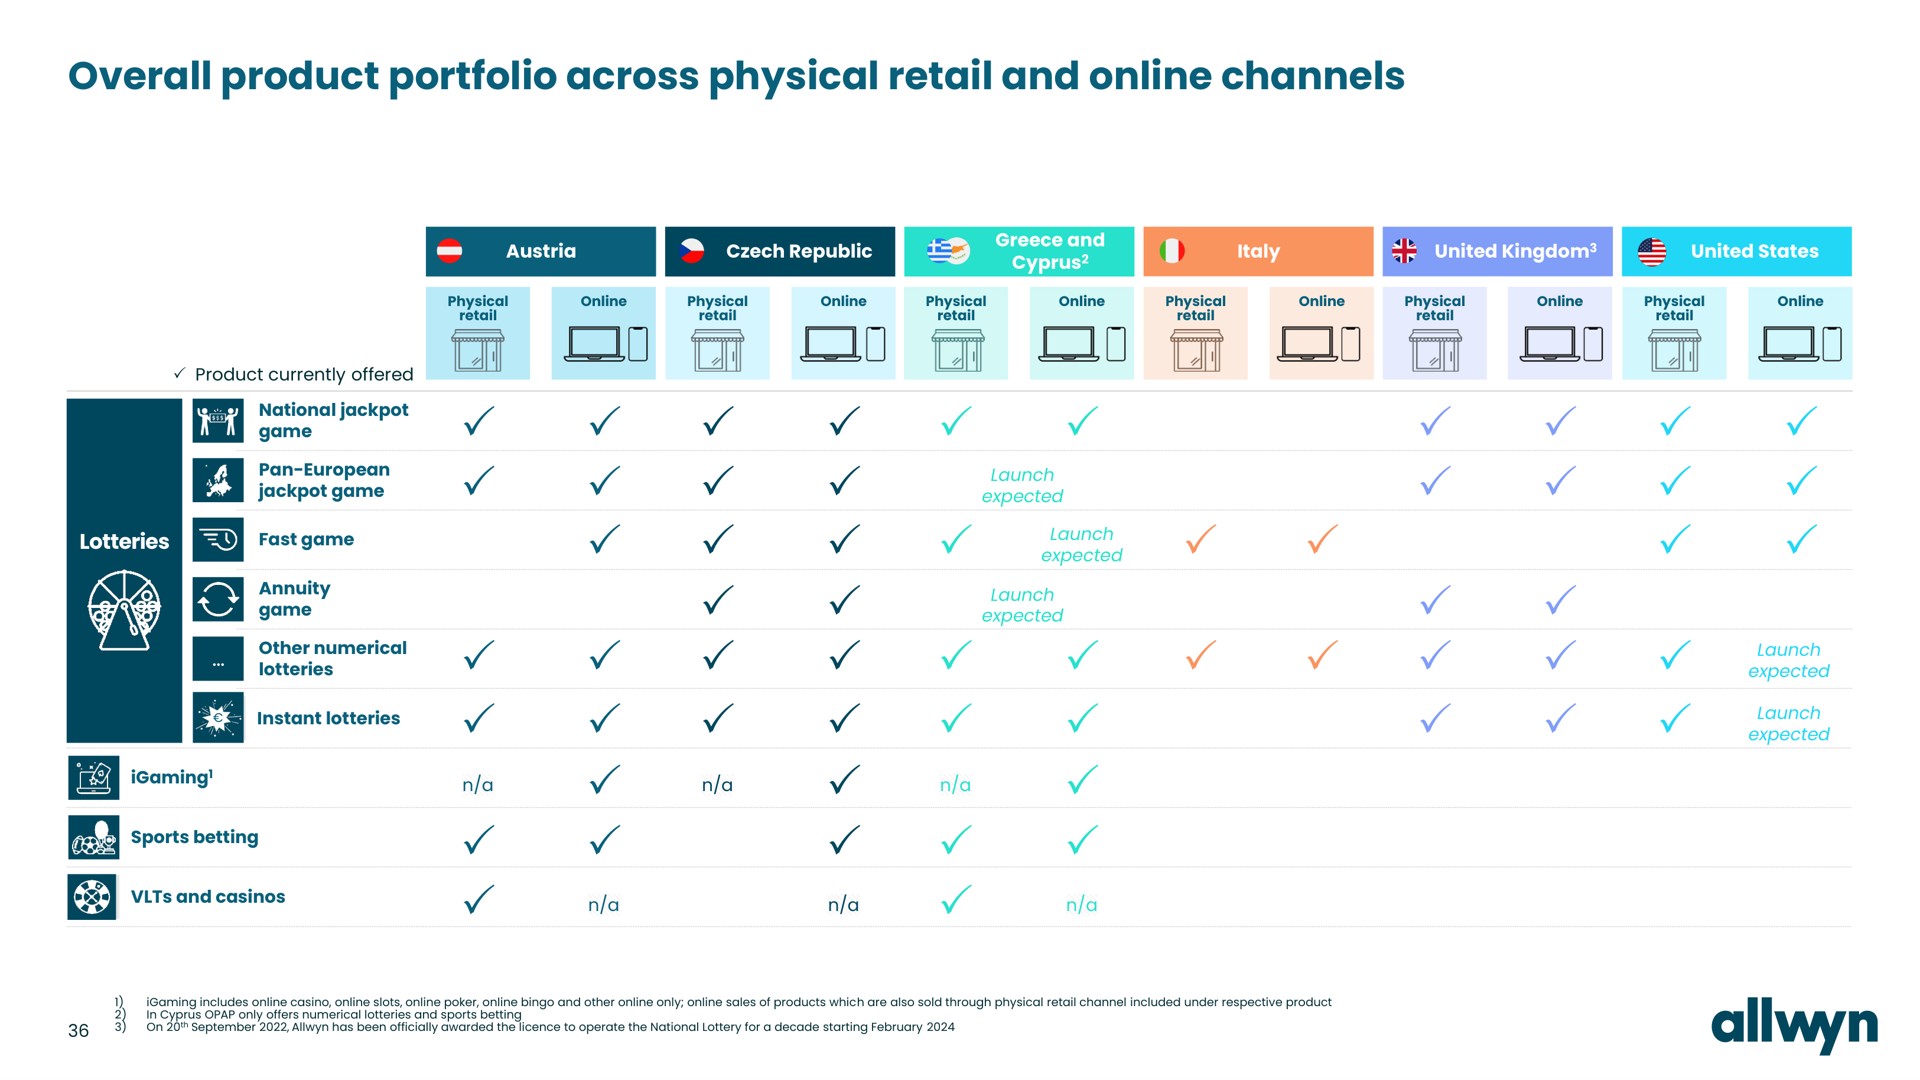 overall product portfolio across physical retail and channels bes tae | Allwyn